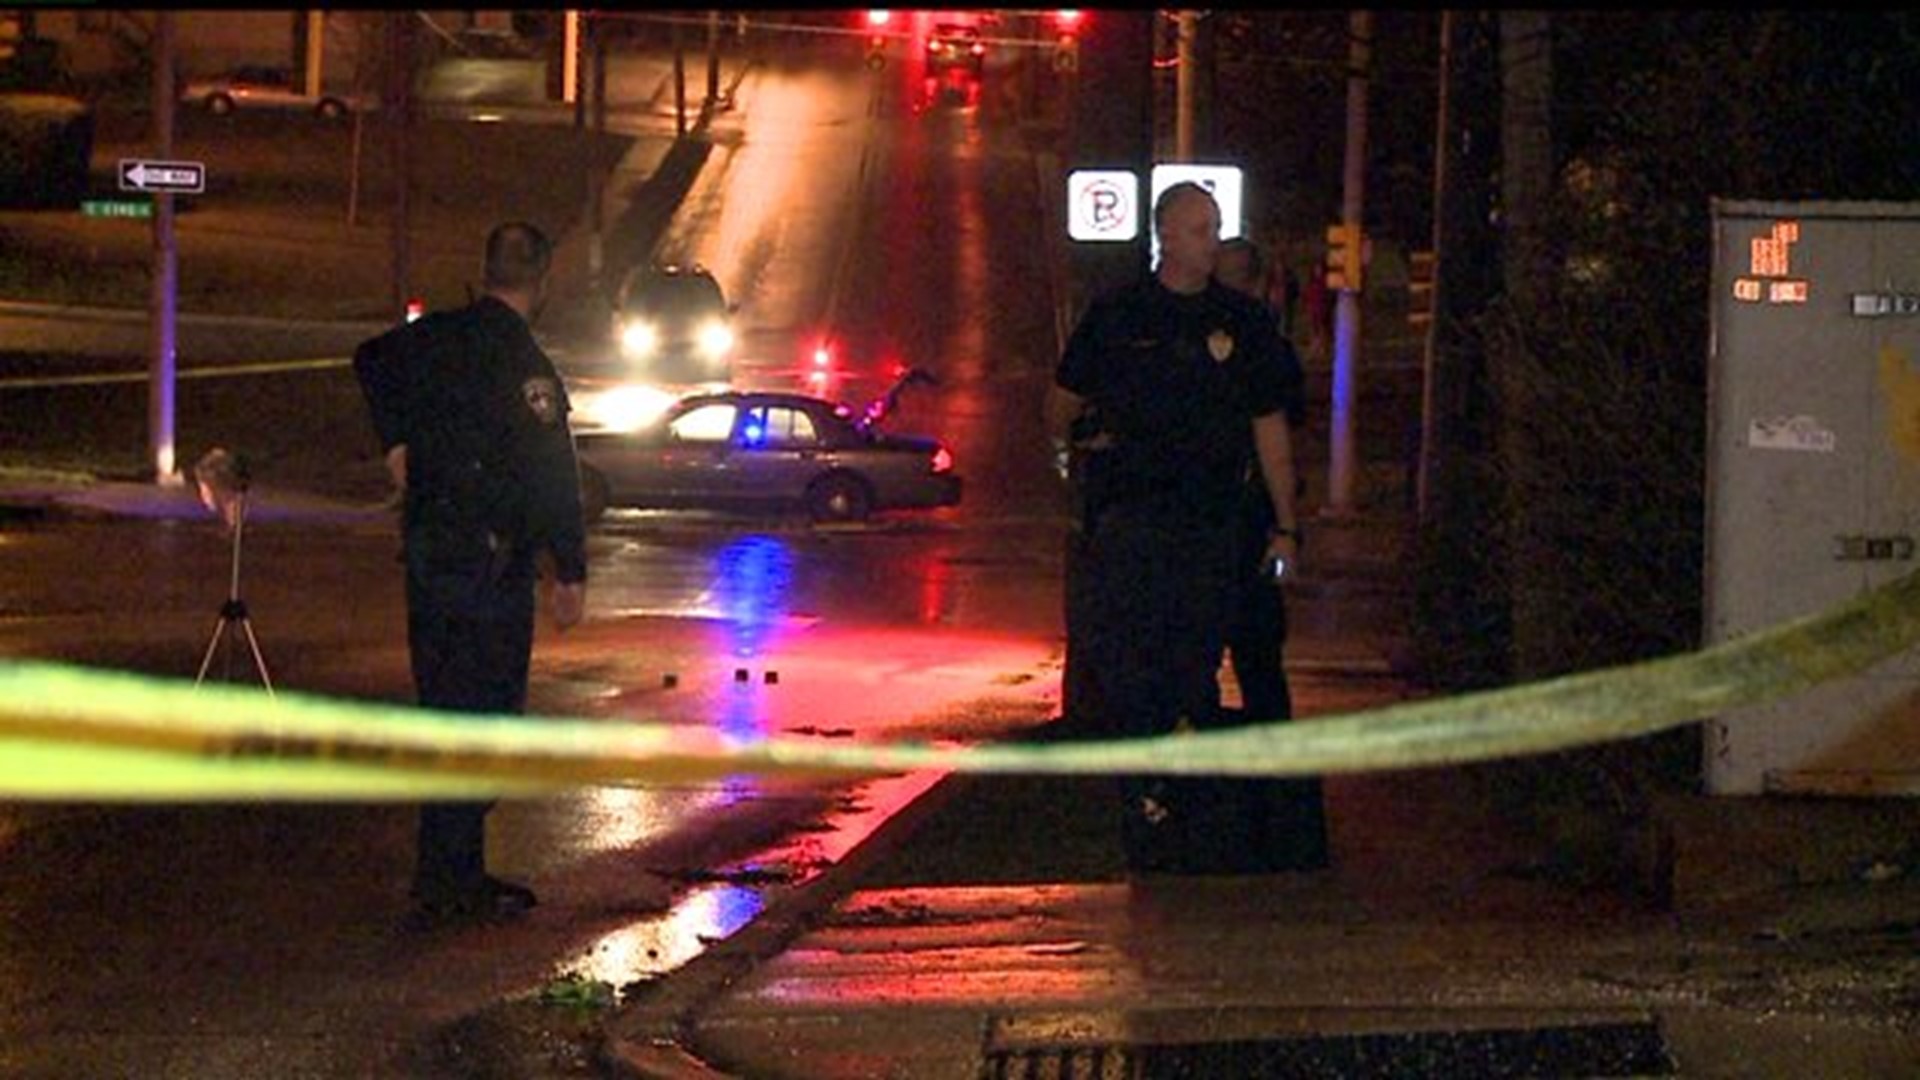 Shooting in York leaves 20-year-old wounded and police officer injured